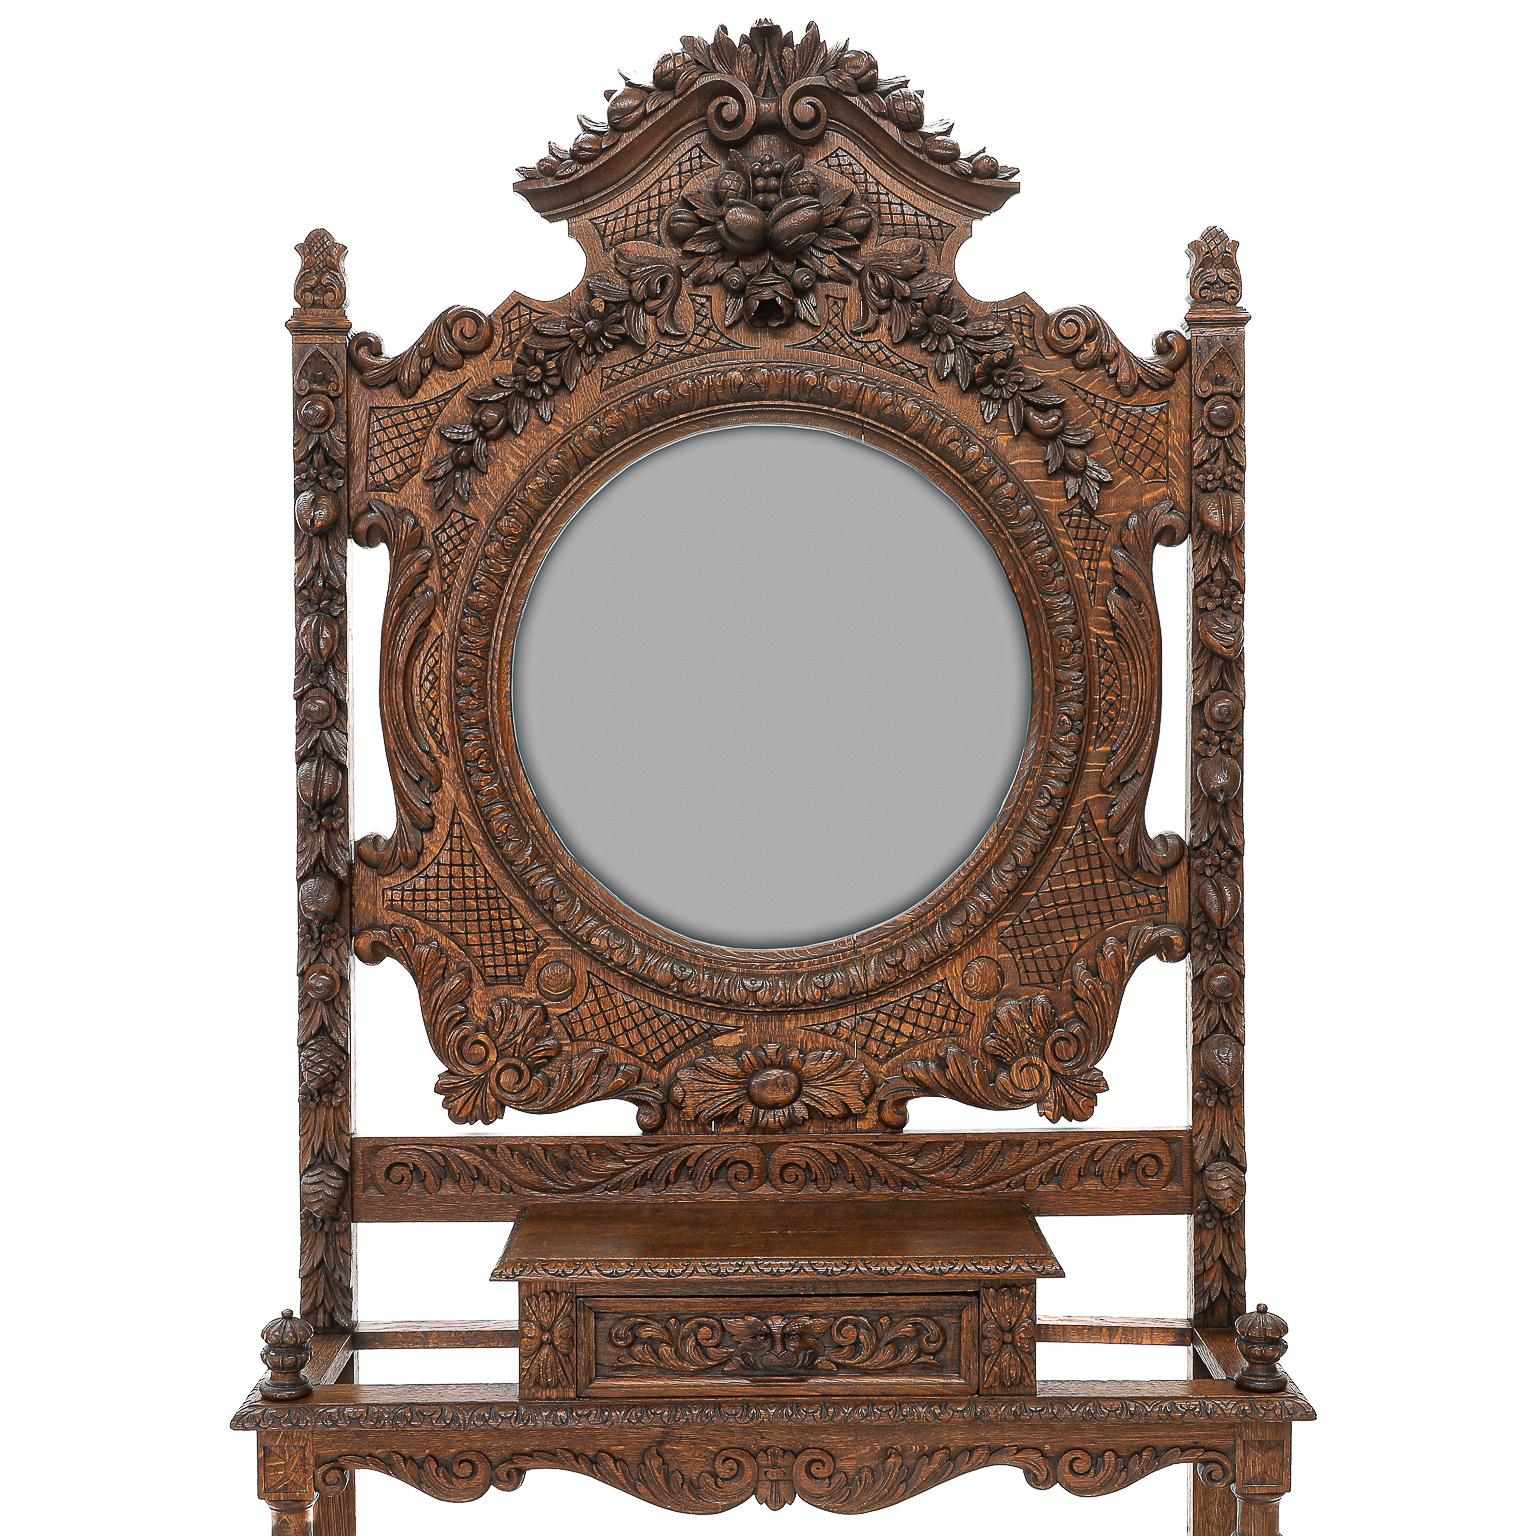 19th century French Provincial Oak Hall Tree, Finely Carved Details, Sides Having Carved Acorn Caps and Feature Carved Fruit and Floral Accents in a Gibbons Style, Center Having Round Beveled Mirror Surrounded by Carved Moulding, Carved Diaper